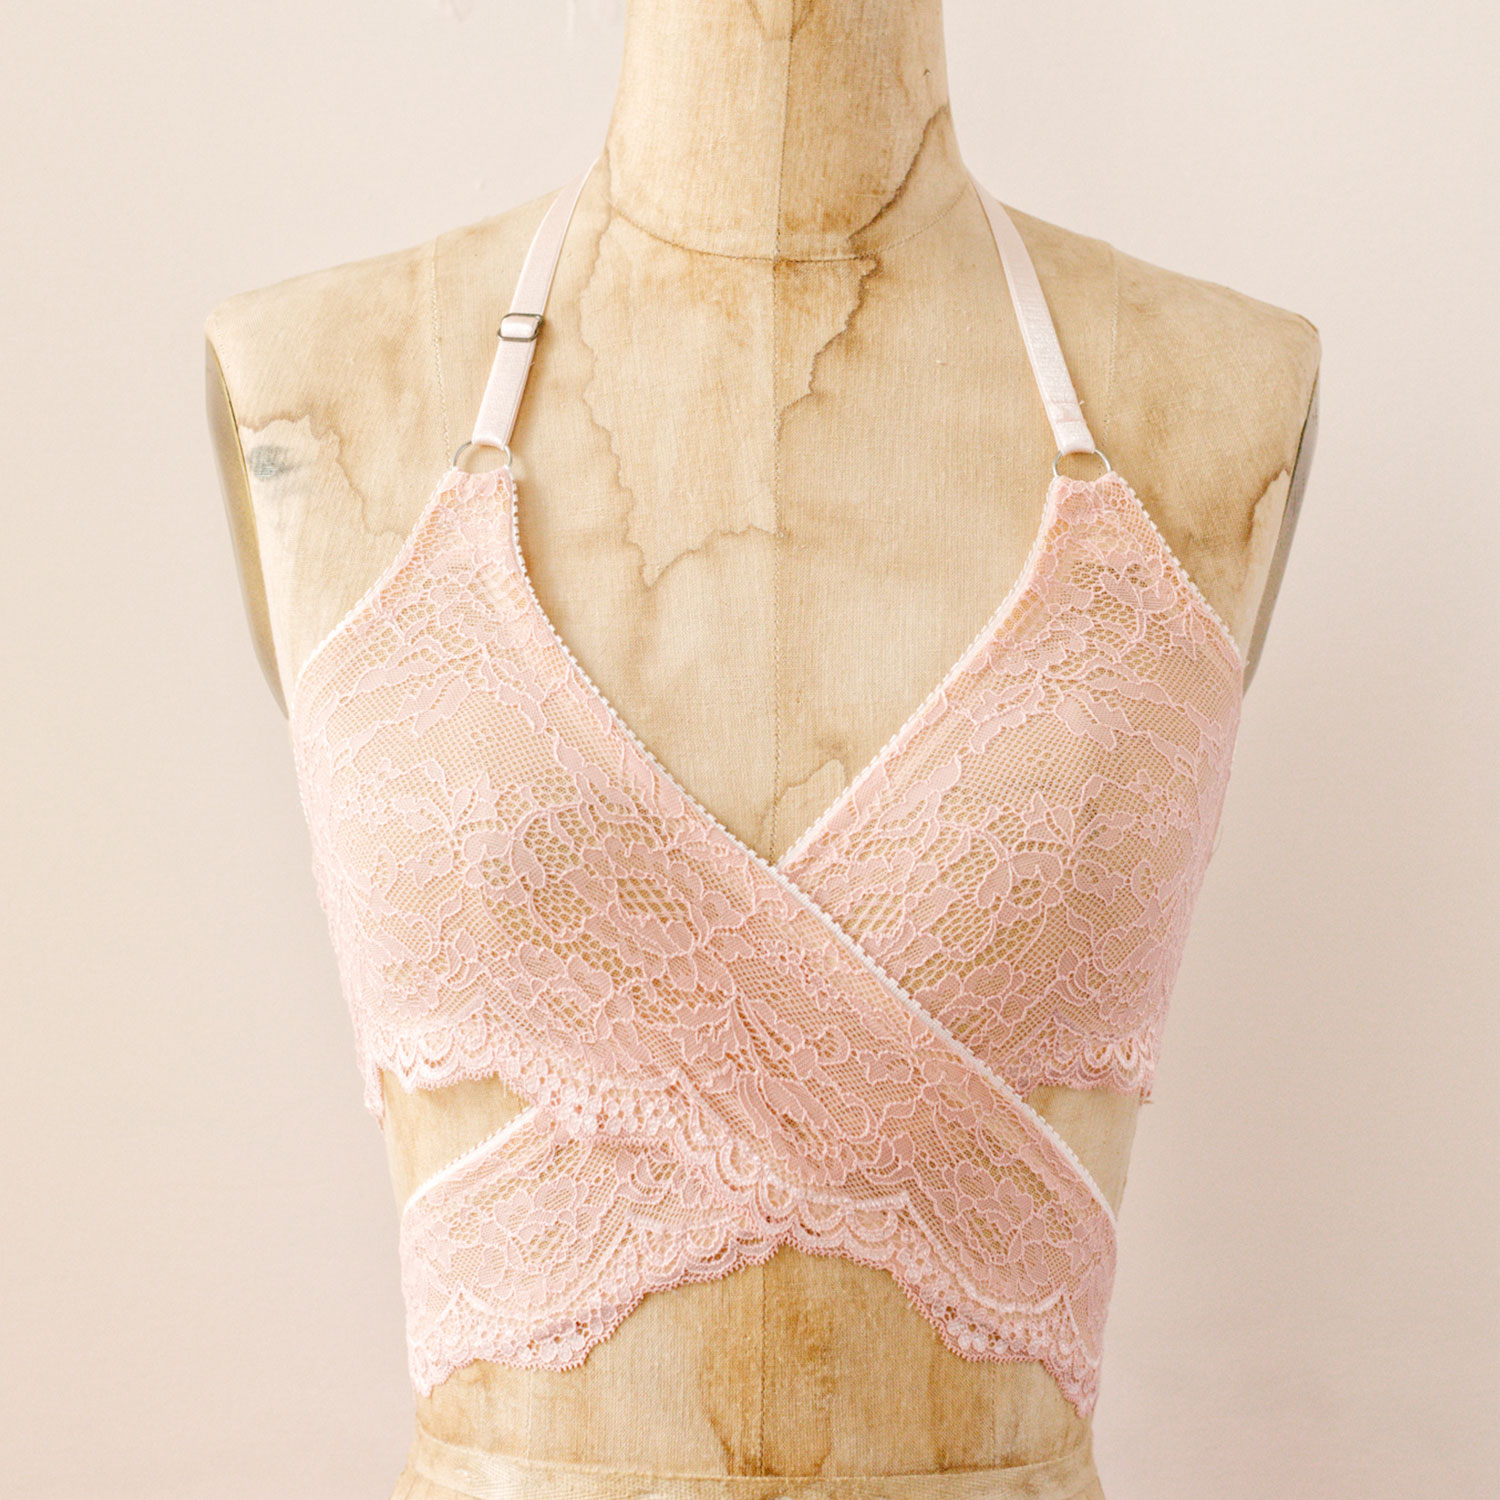 Where to Find Printable PDF Bralette Patterns At First Blush Patterns